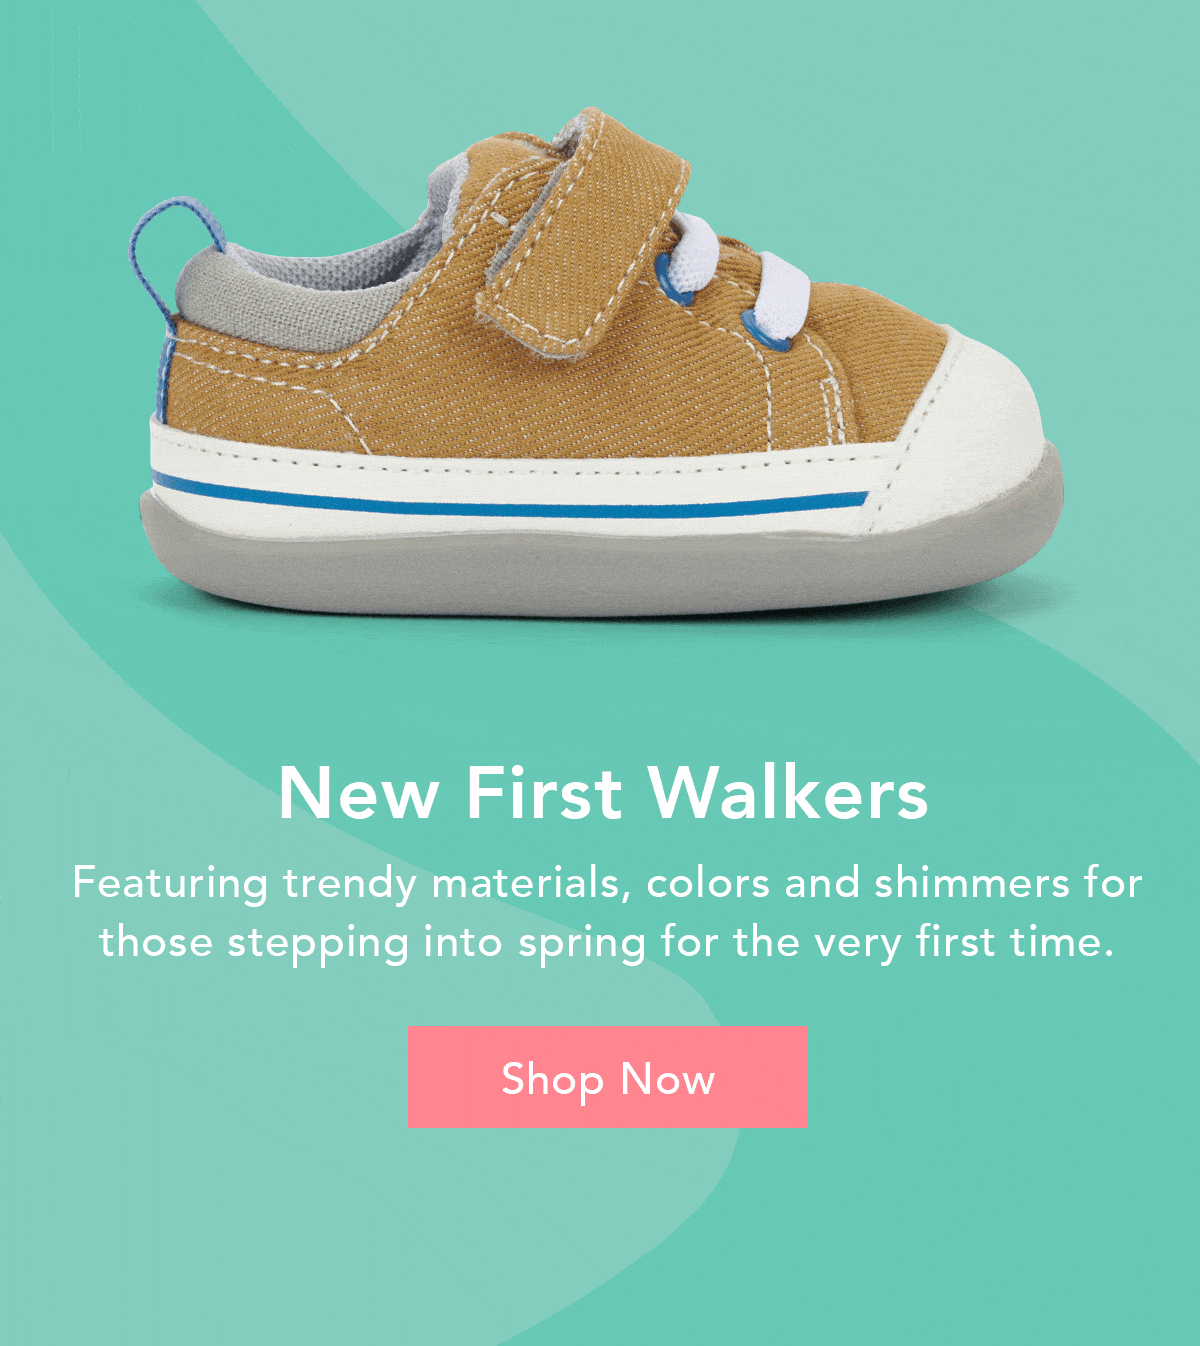 New First Walkers!